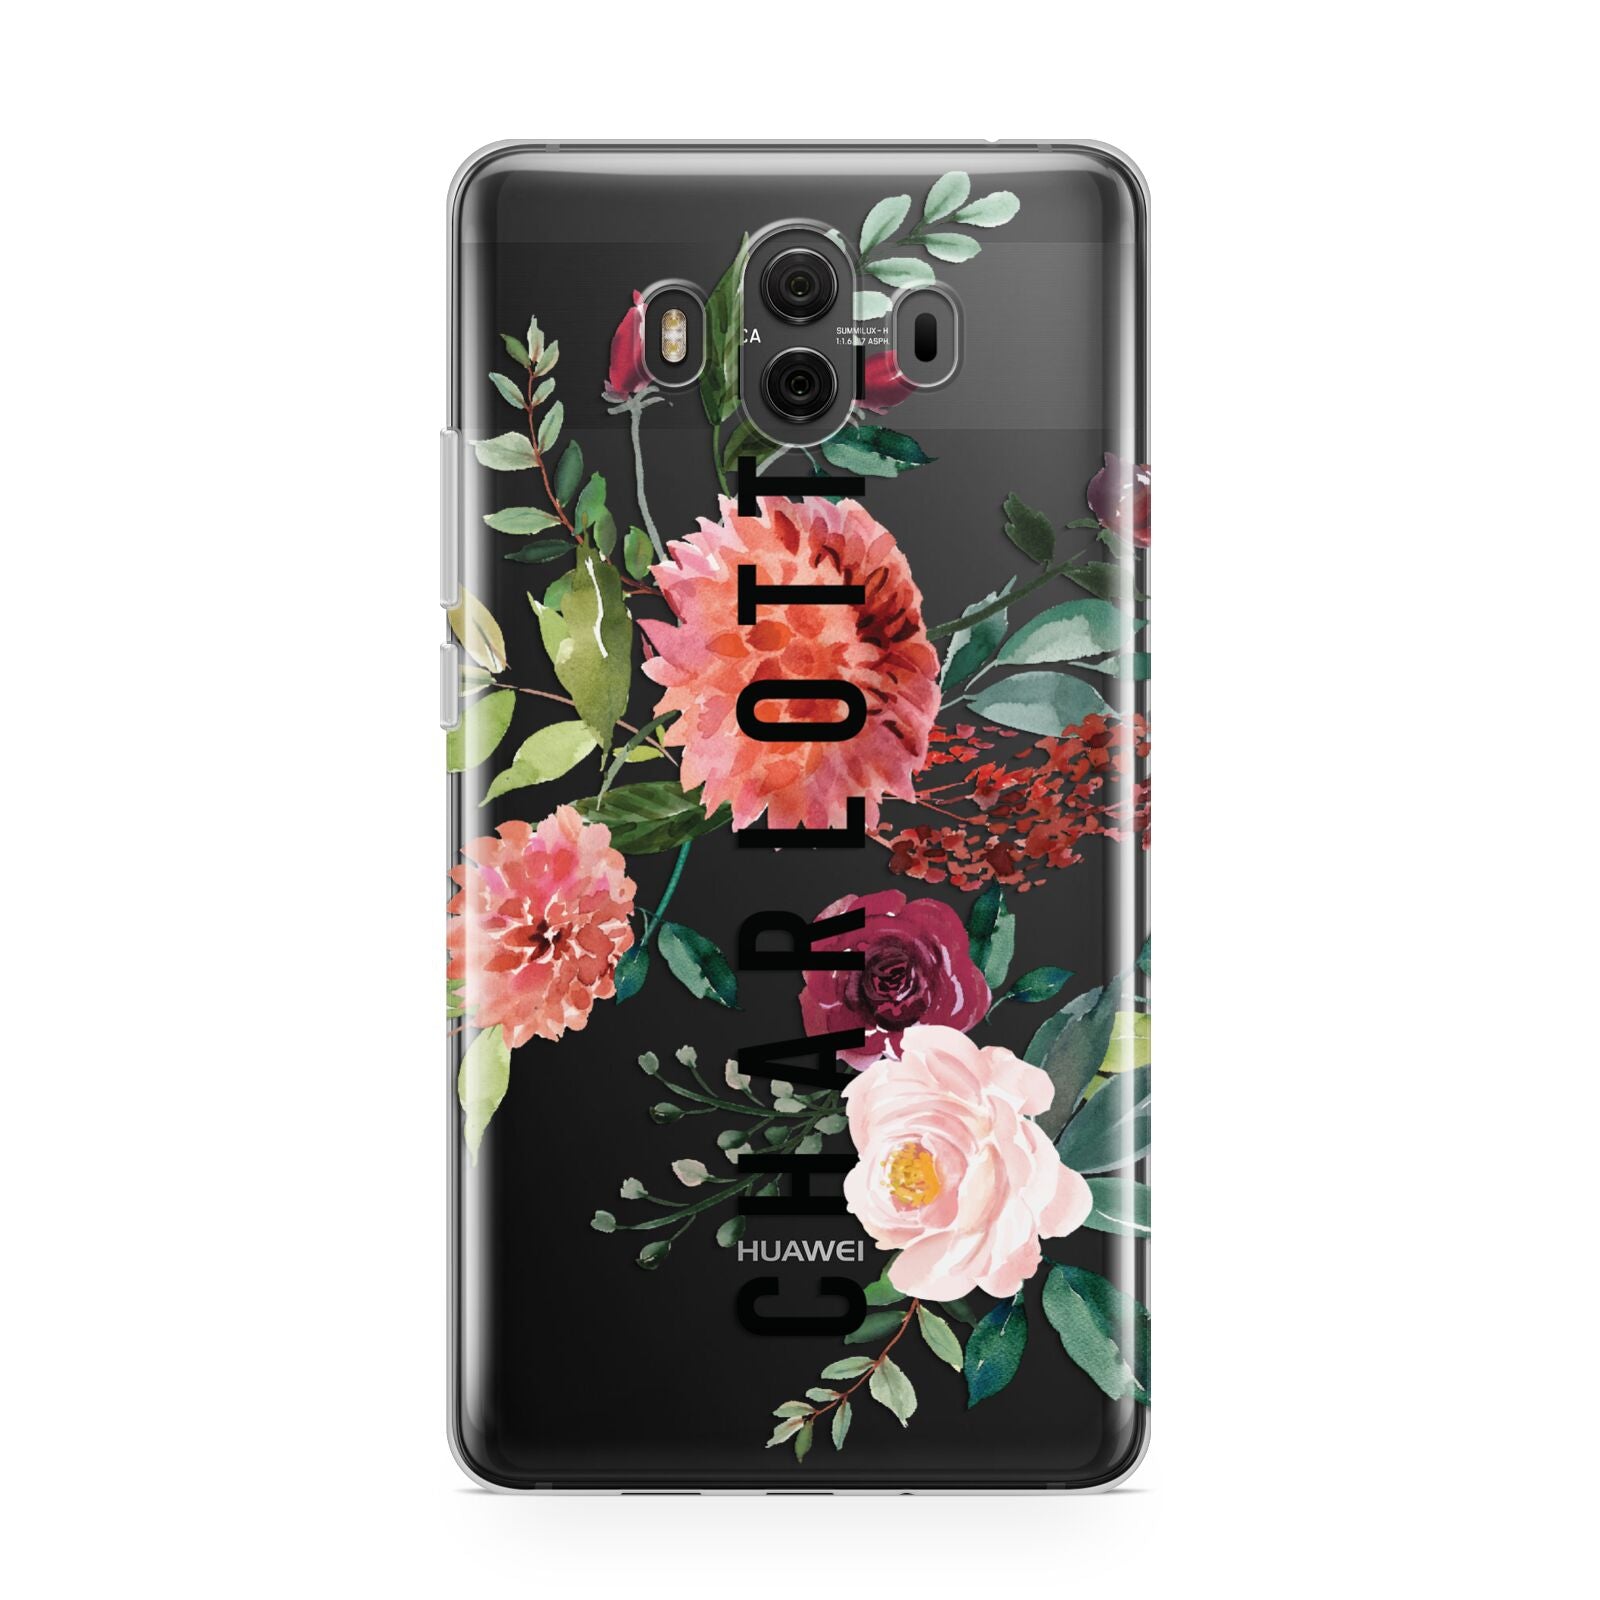 Personalised Side Name Clear Floral Huawei Mate 10 Protective Phone Case